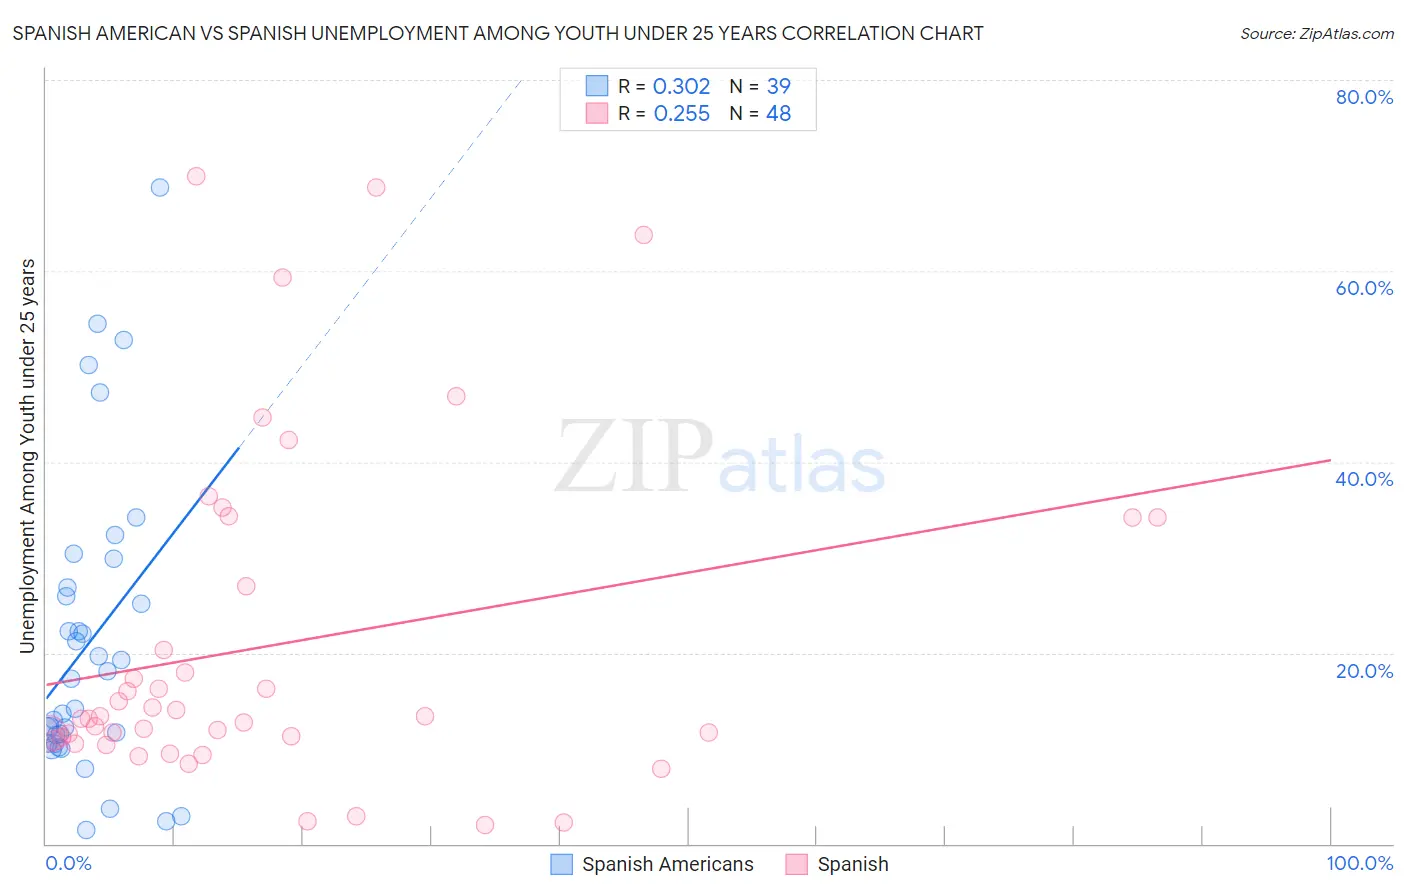 Spanish American vs Spanish Unemployment Among Youth under 25 years